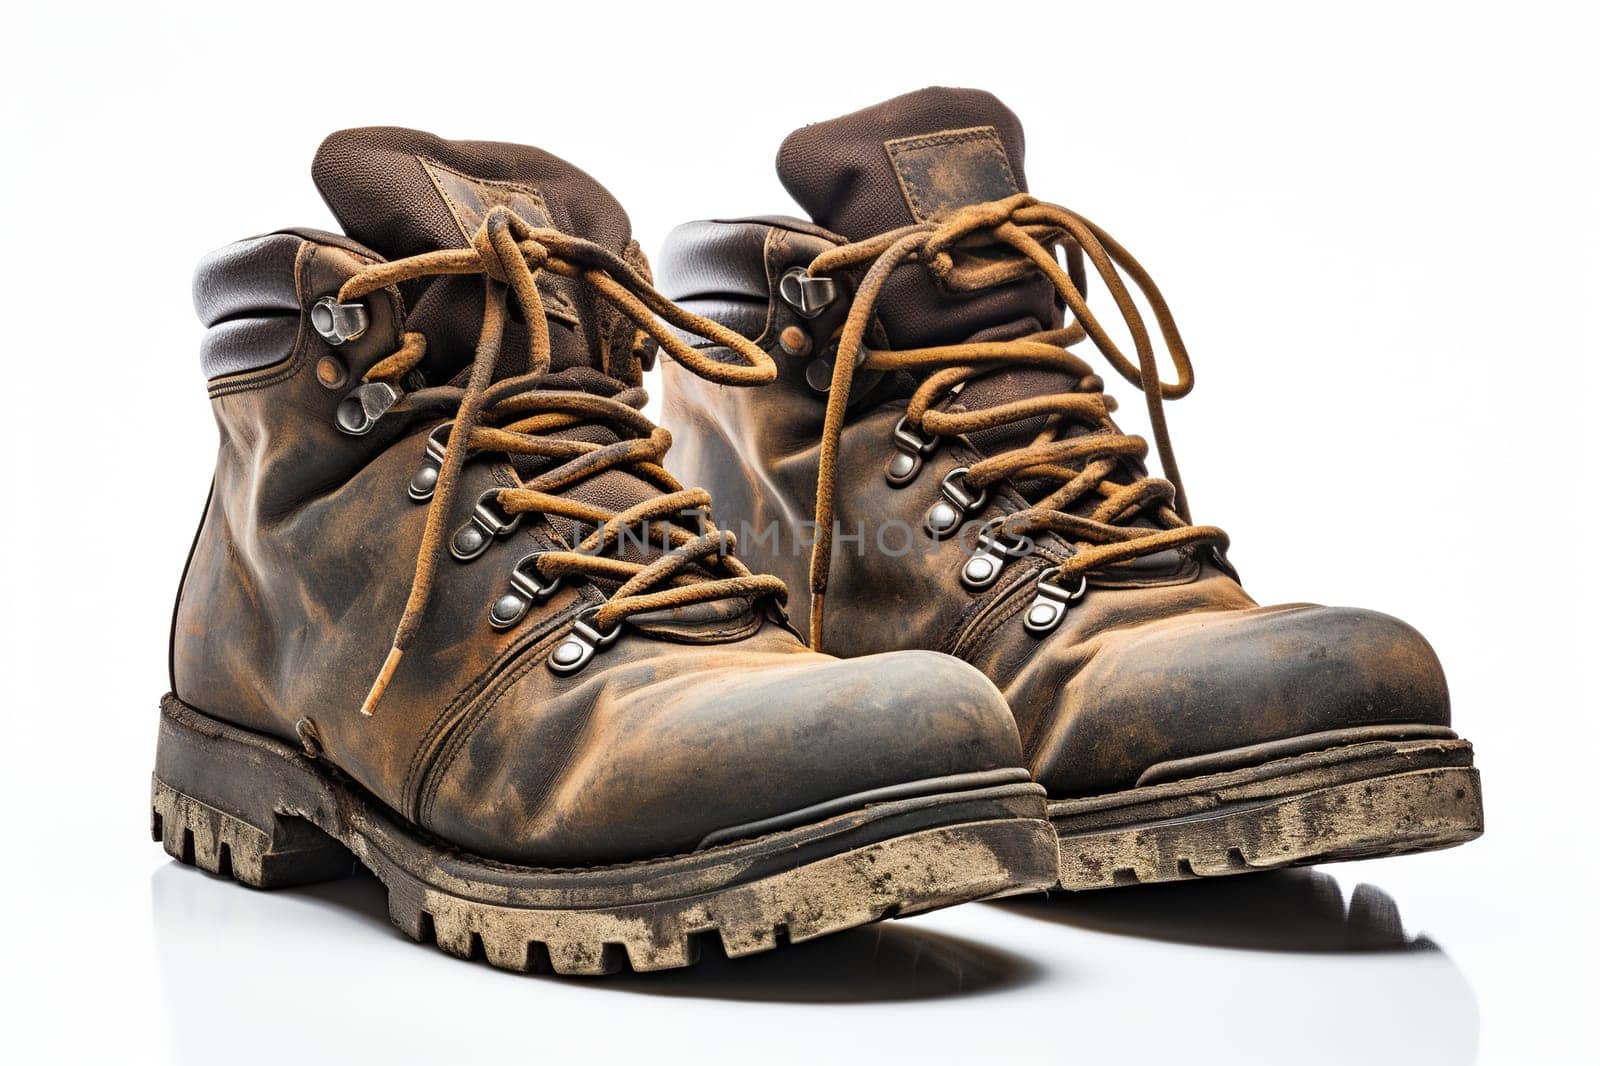 Old worn military boots on a white background. Generated by artificial intelligence by Vovmar